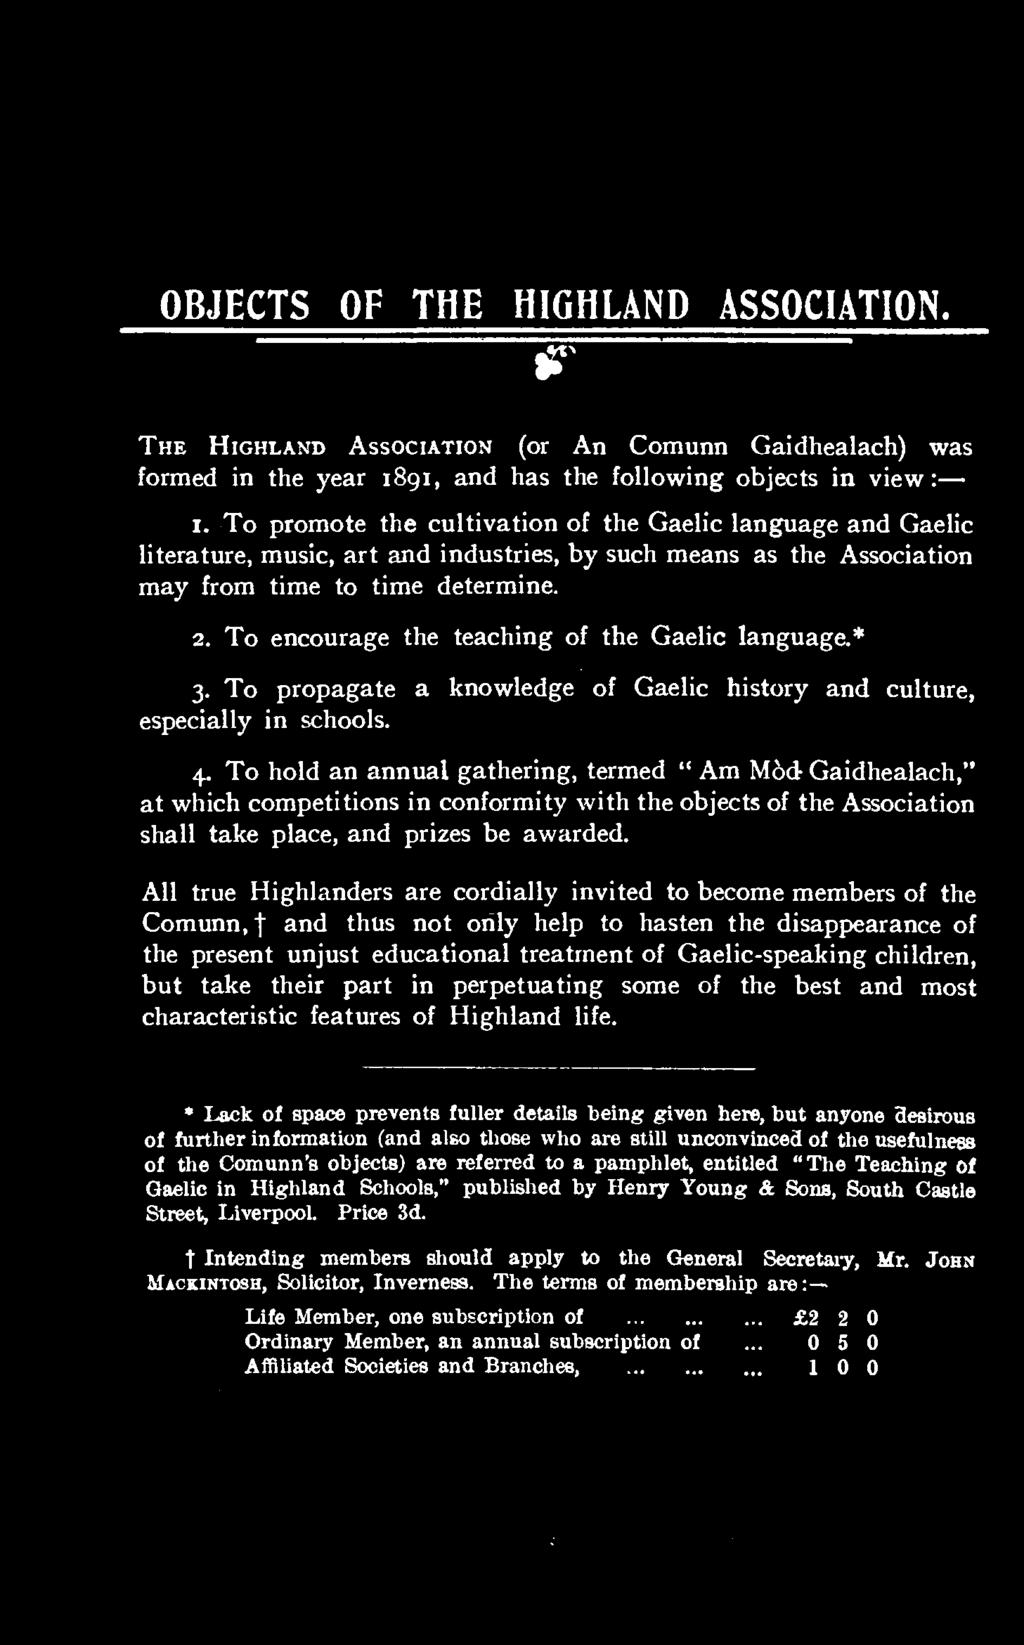 All true Highlanders are cordially invited to become members of the Comunn, and thus not only help to hasten the disappearance of the present unjust educational treatment of Gaelic-speaking children,